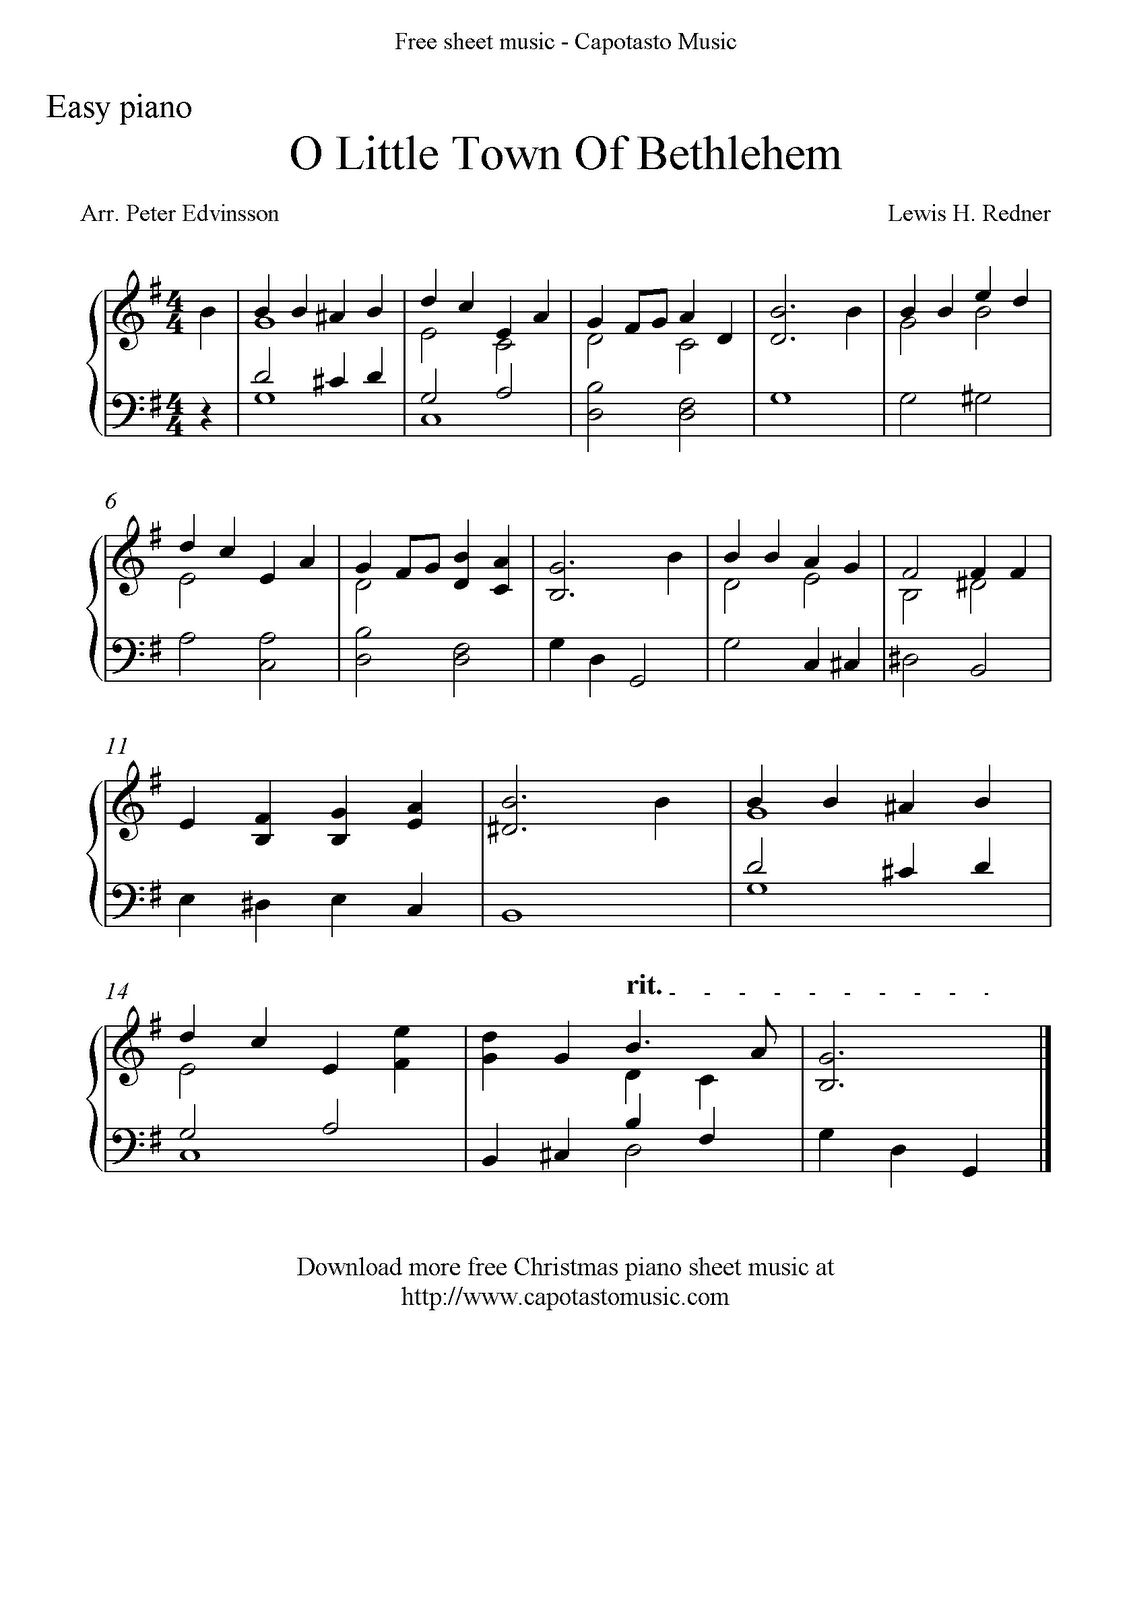 Easy Piano Solo Arrangementpeter Edvinsson Of The Christmas - Free Printable Christmas Sheet Music For Piano